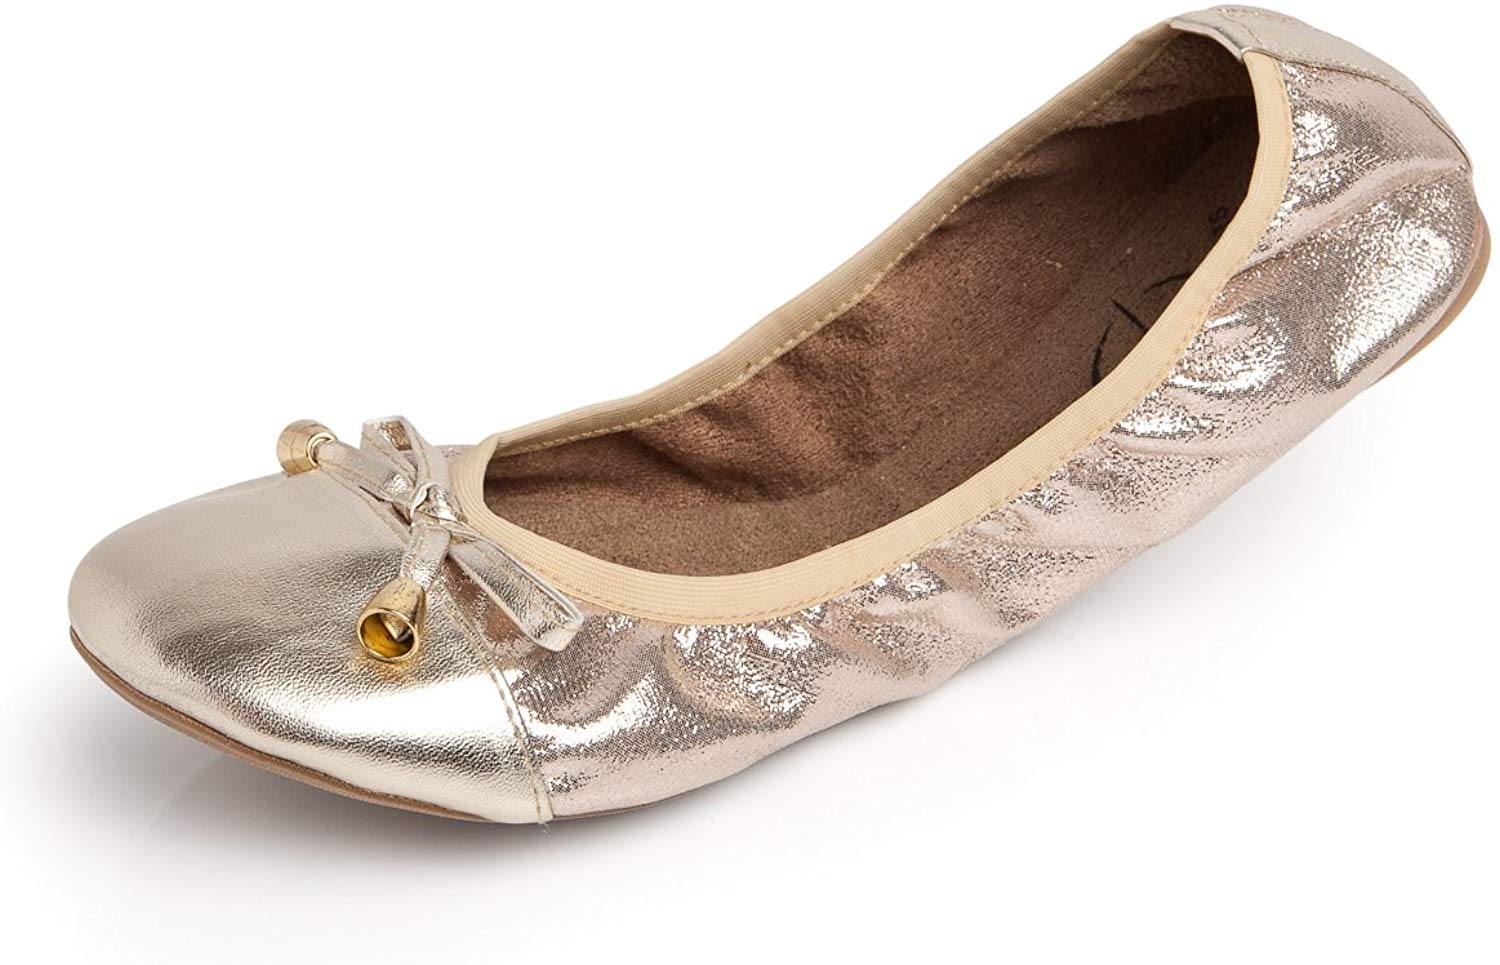 TALARIA Women's Premium Foldable Flats with Pouch $42 NEW | eBay